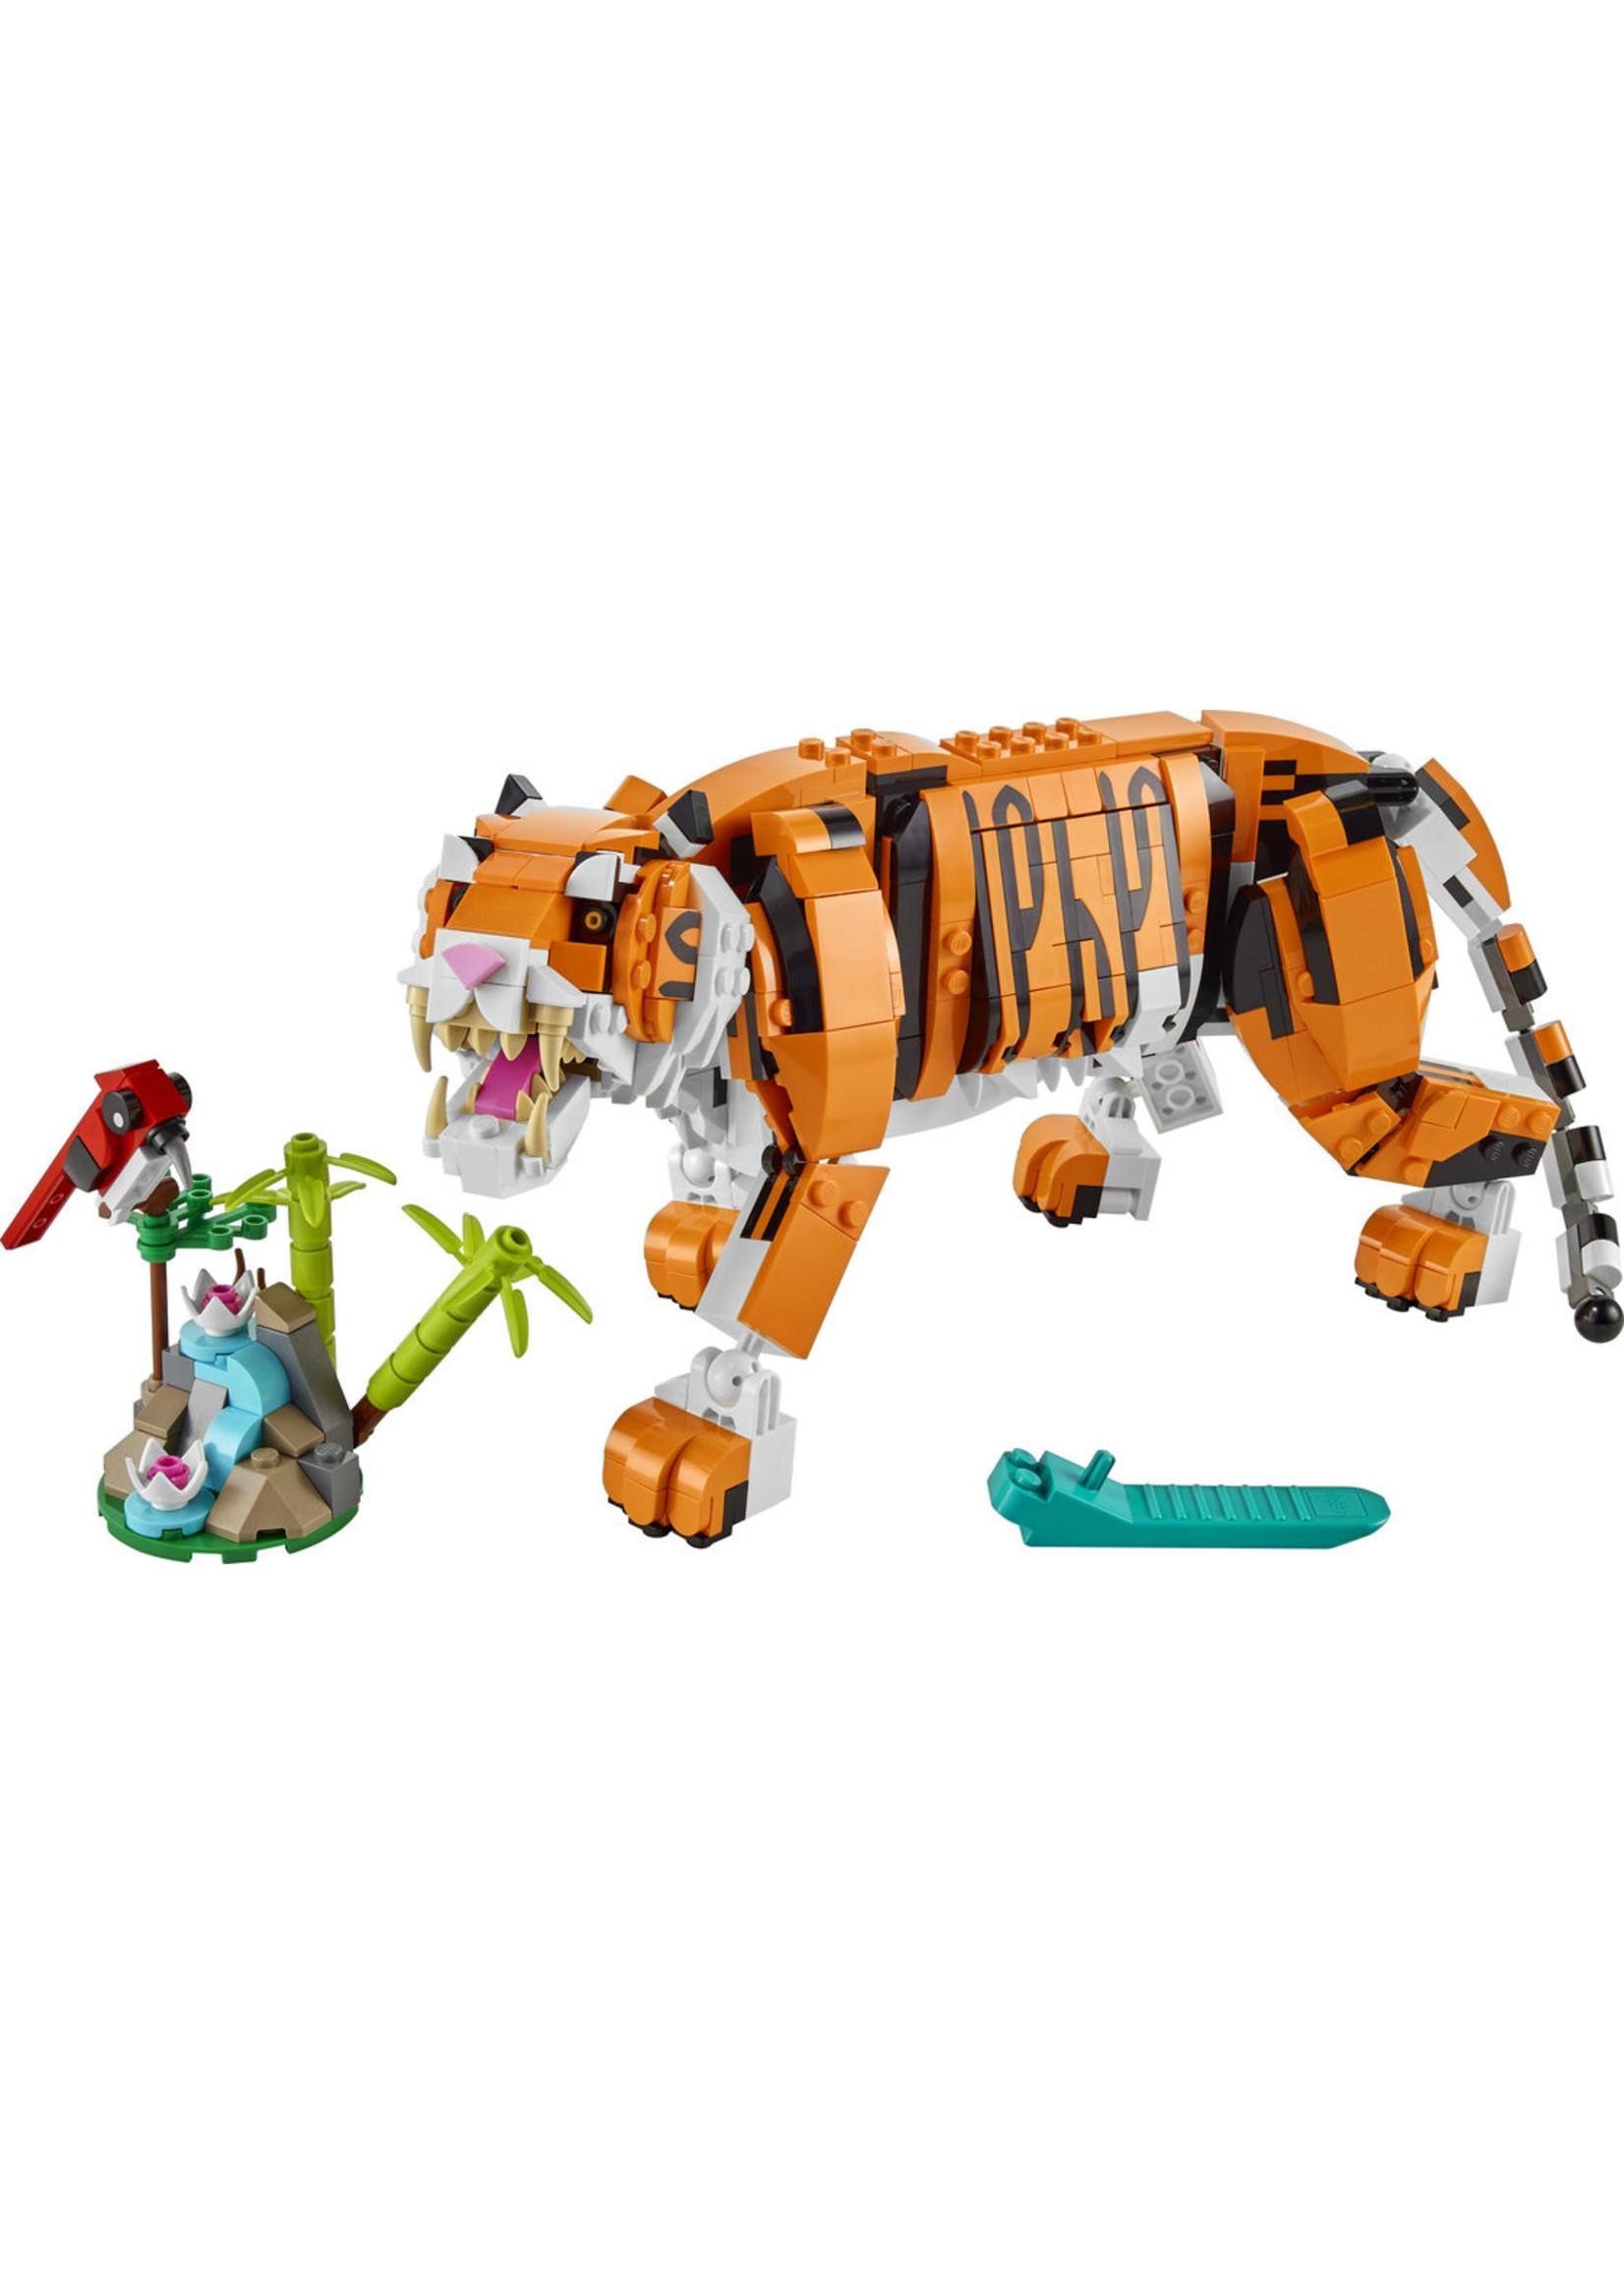 LEGO 31129 - The Majestic Tiger